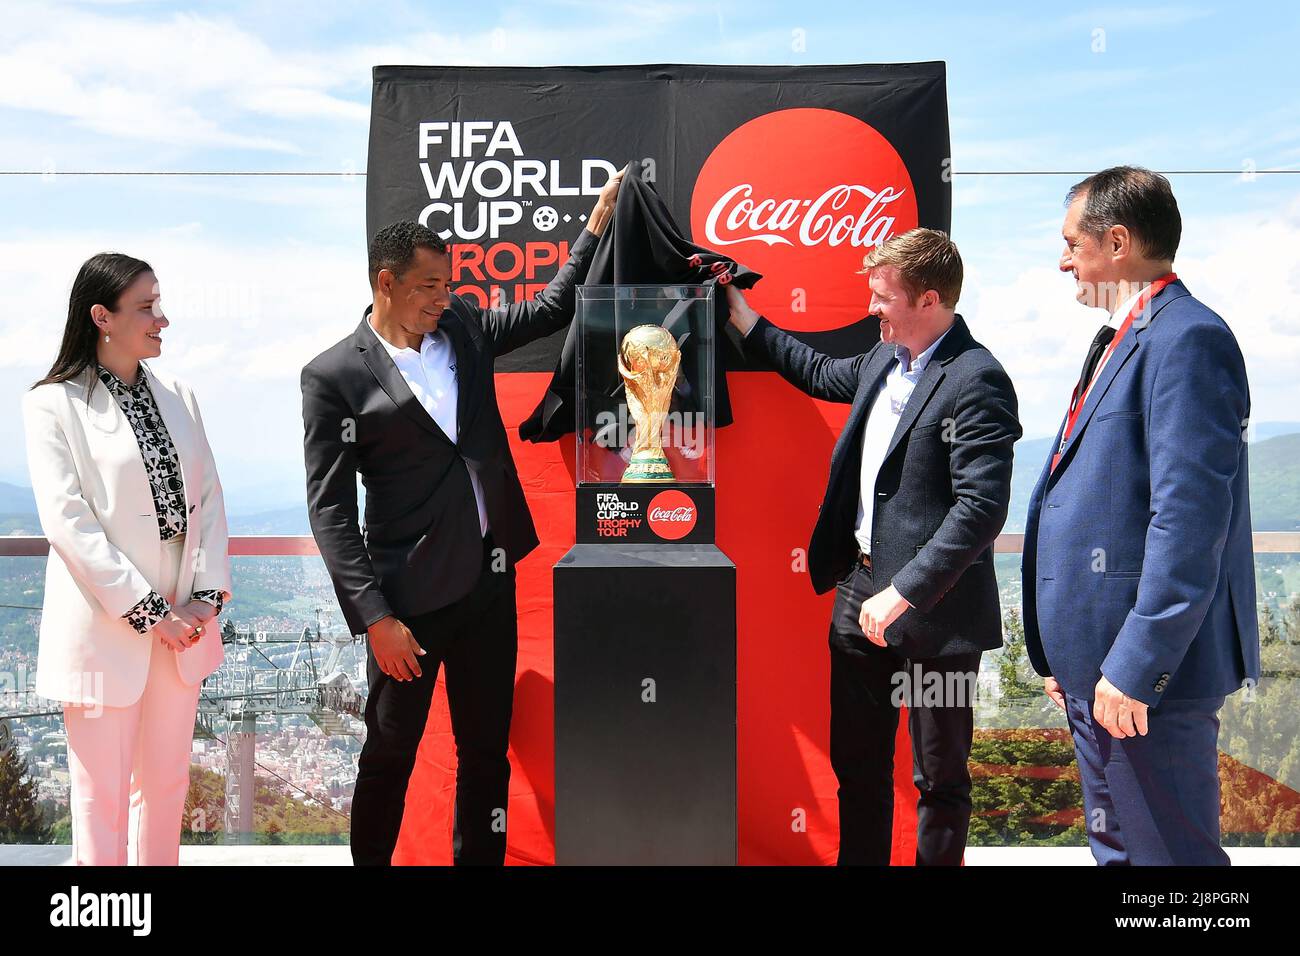 Sarajevo, FIFA World Cup Trophy Tour in Sarajevo. 17th May, 2022. Gilberto Silva (2nd L), former Brazilian football player, unveils the trophy during the FIFA World Cup Trophy Tour in Sarajevo, Bosnia and Herzegovina (BiH) on May 17, 2022. Credit: Nedim Grabovica/Xinhua/Alamy Live News Stock Photo